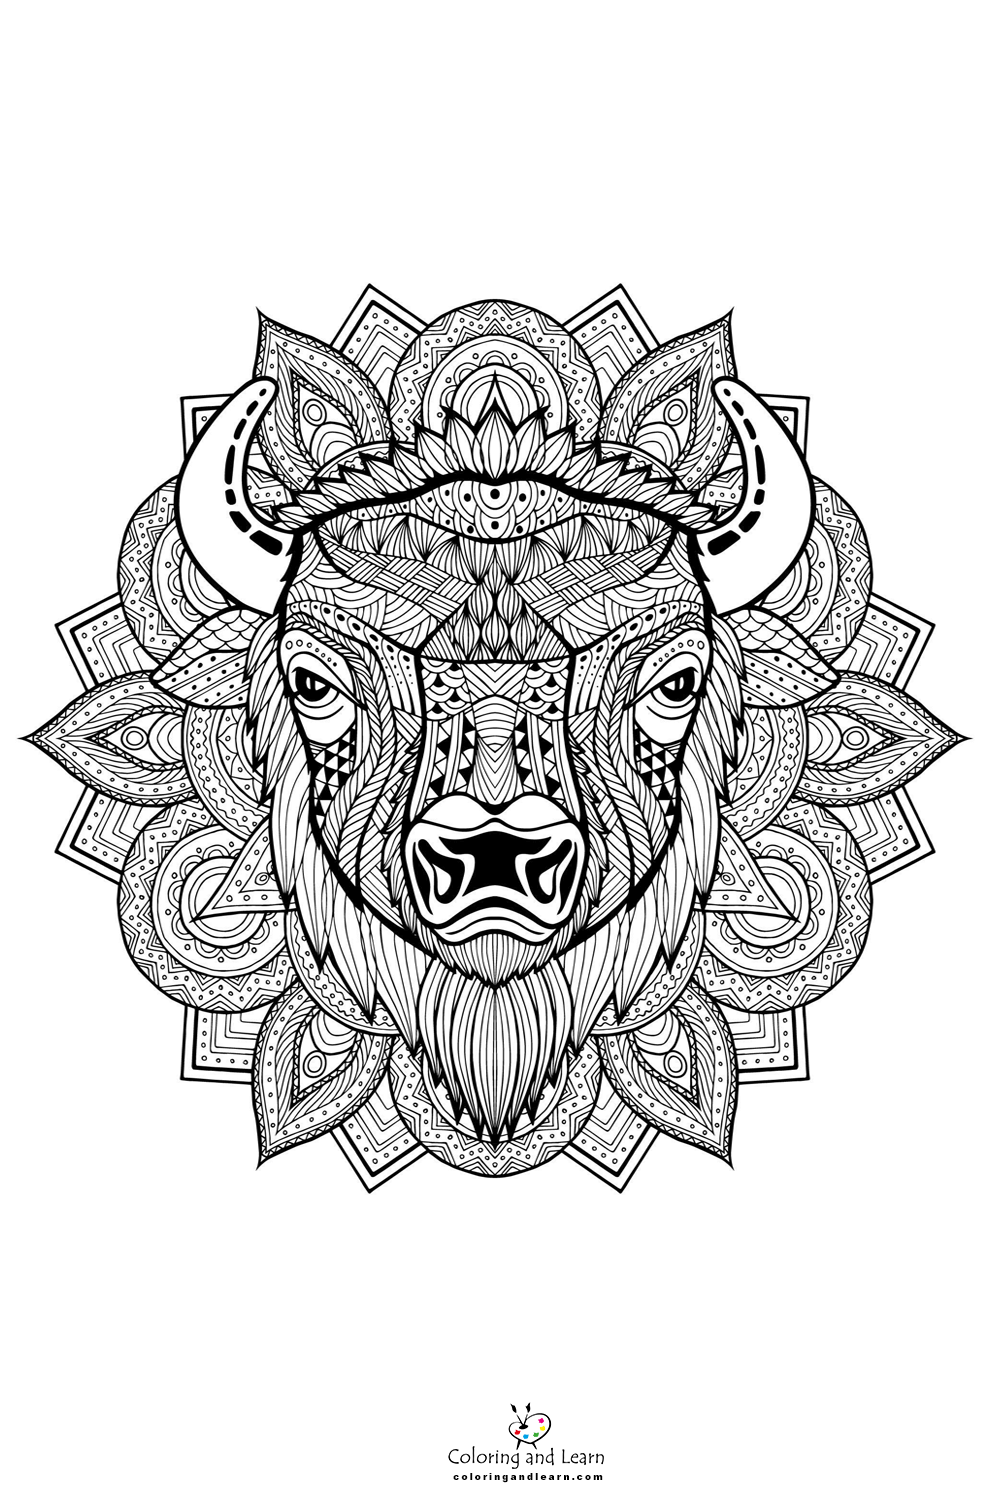 Bison face coloring page